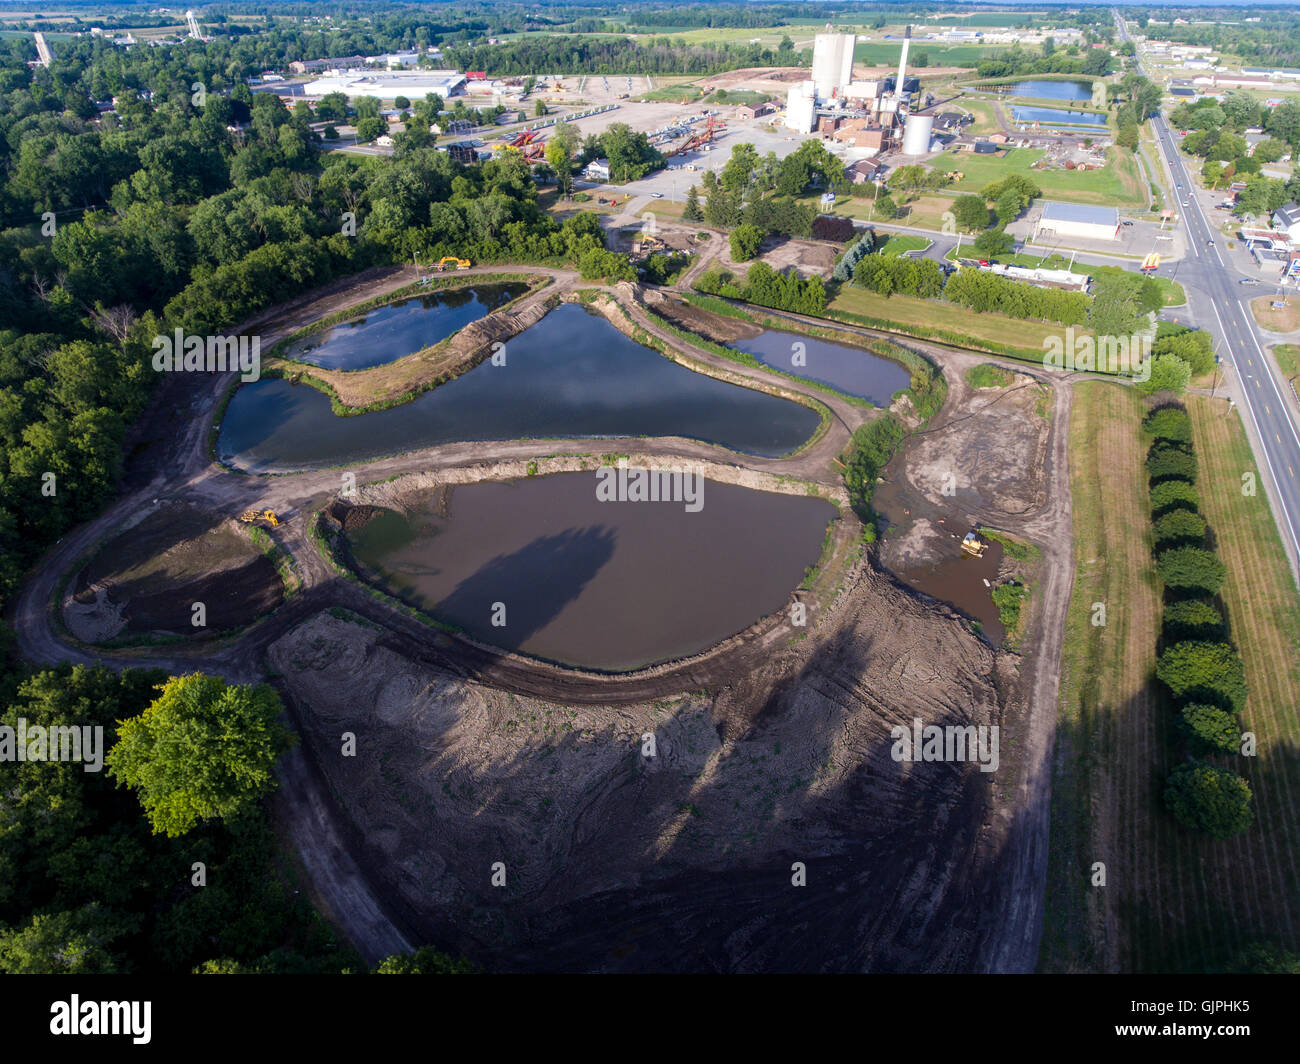 Lagoon system Sewage waste treatment plant in Croswell Michigan Stock Photo